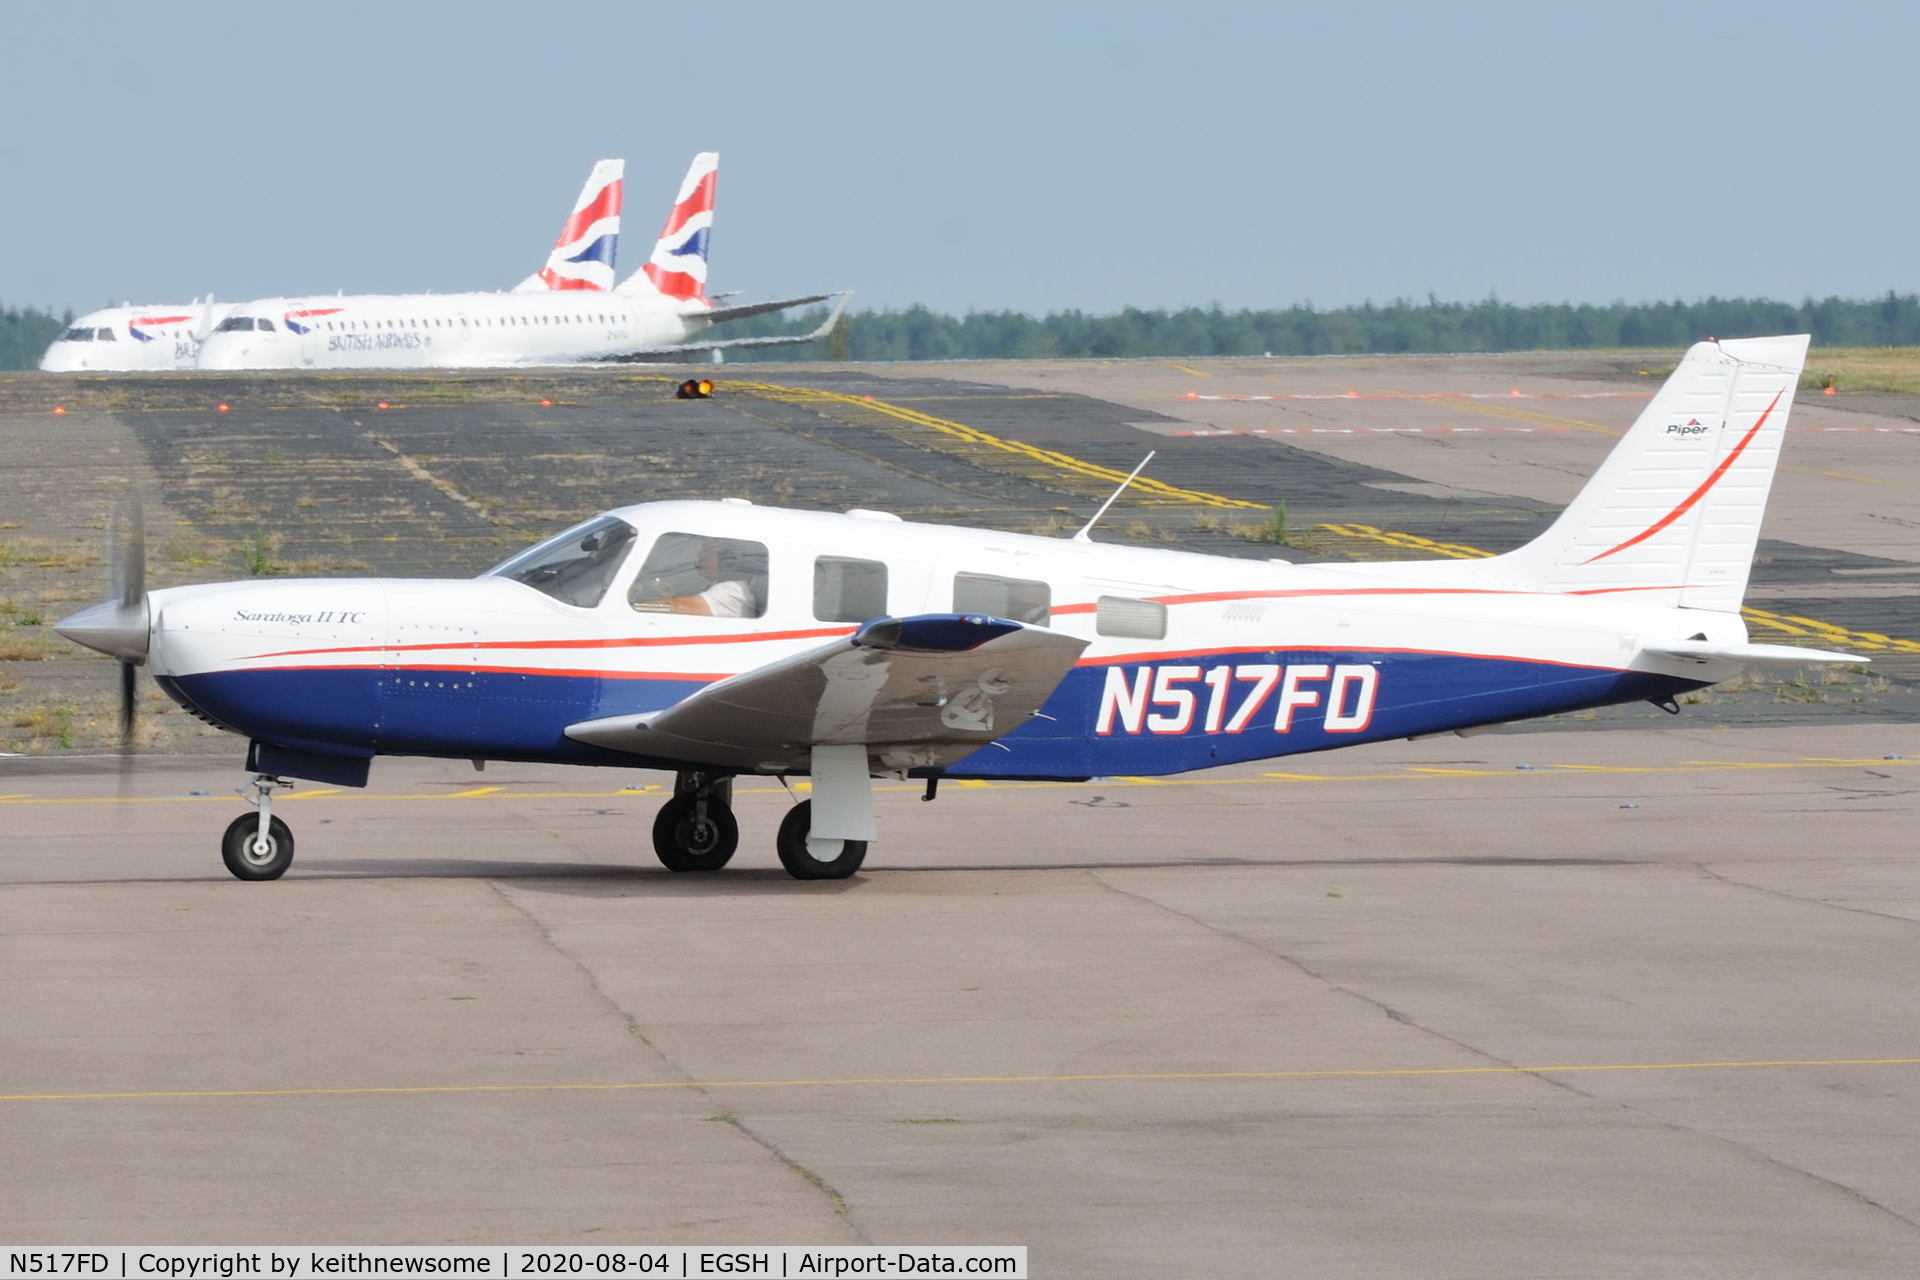 N517FD, 2001 Piper PA-32R-301T Turbo Saratoga C/N 3257263, Arriving at Norwich.